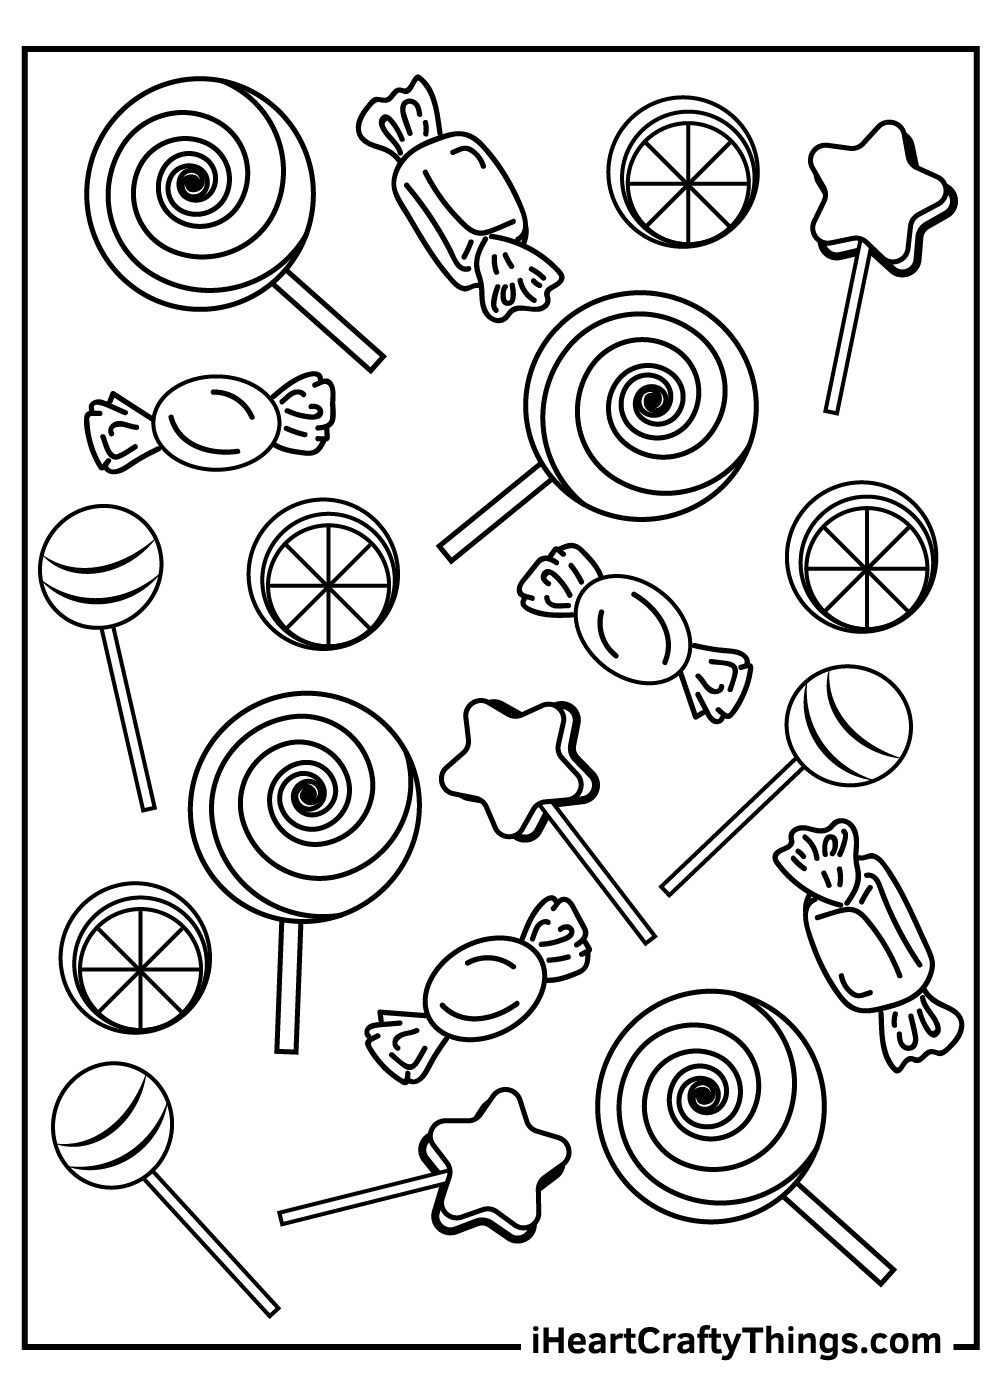 Mx26m Candies Coloring Pages